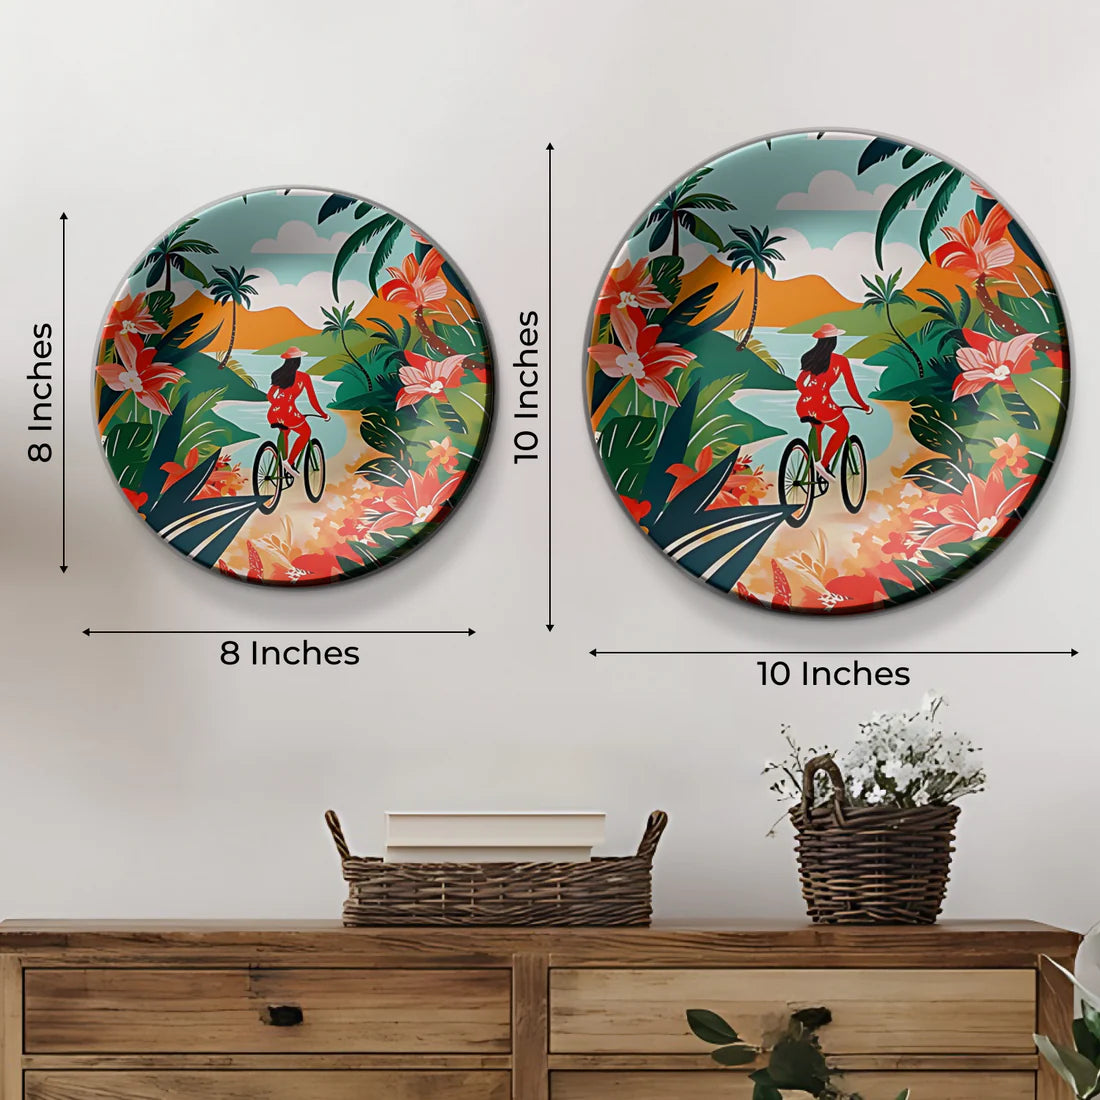 Women Riding Bicycle Ceramic Wall Plate Home Décor